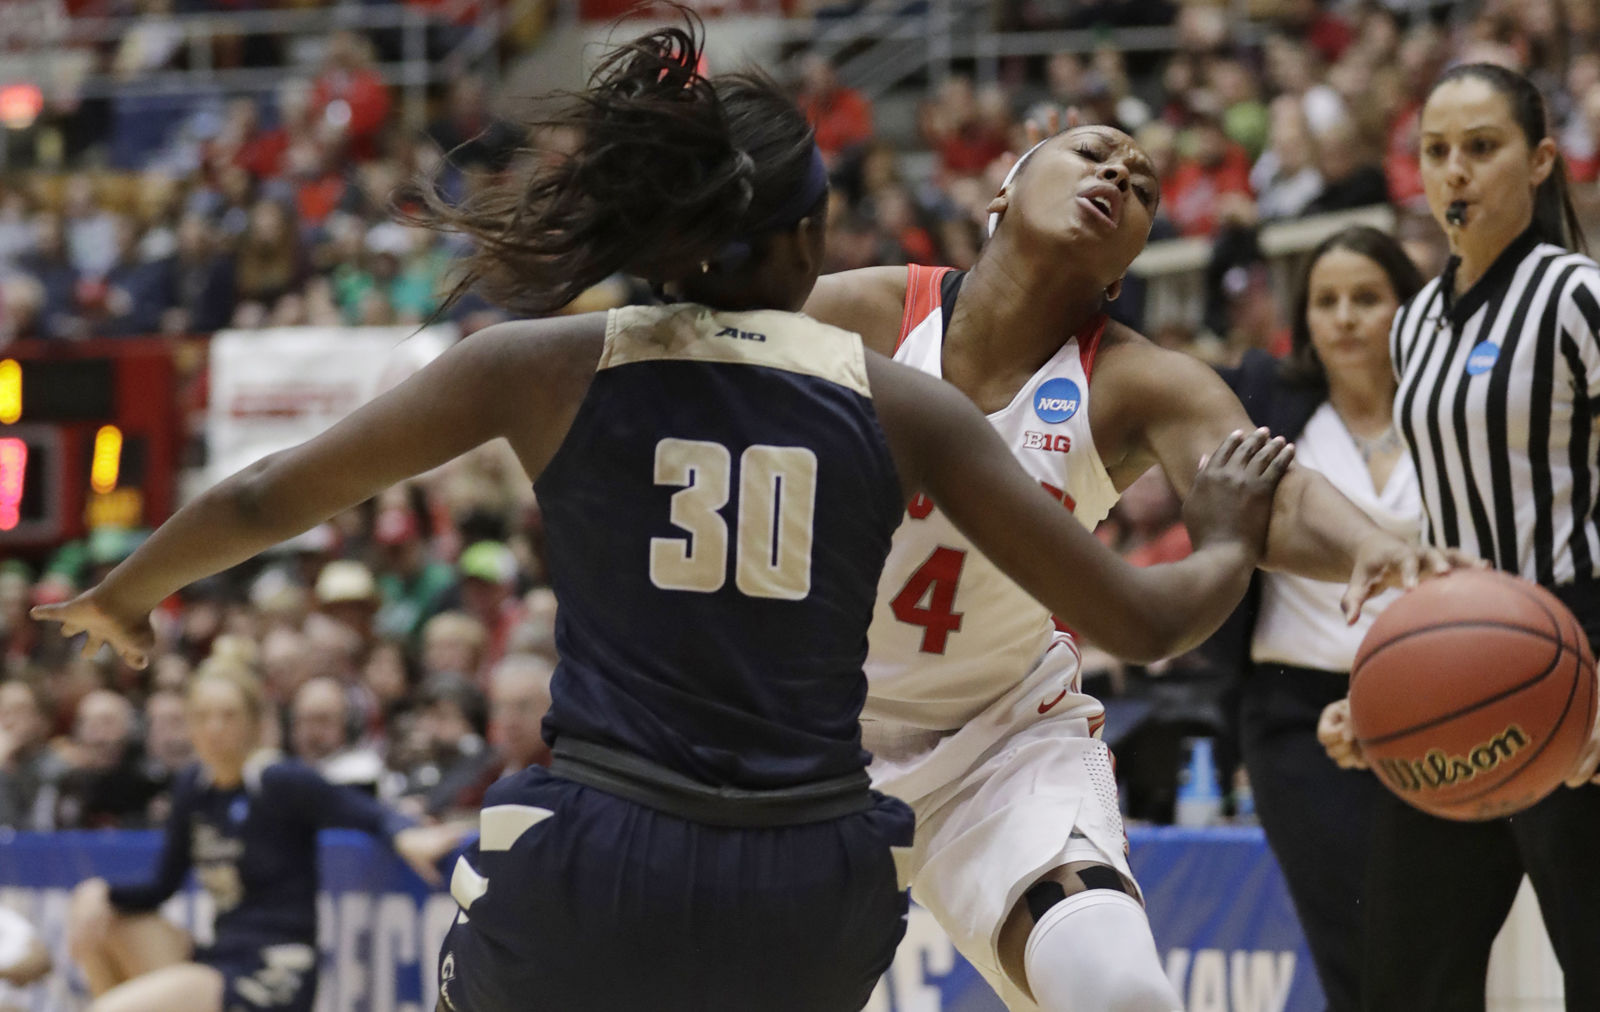 Ohio State's Sierra Calhoun, right, fouls George Washington's Neila Luma (30) in the first half during a first-round game in the NCAA women's college basketball tournament Saturday, March 17, 2018, in Columbus, Ohio. (AP Photo/Tony Dejak)